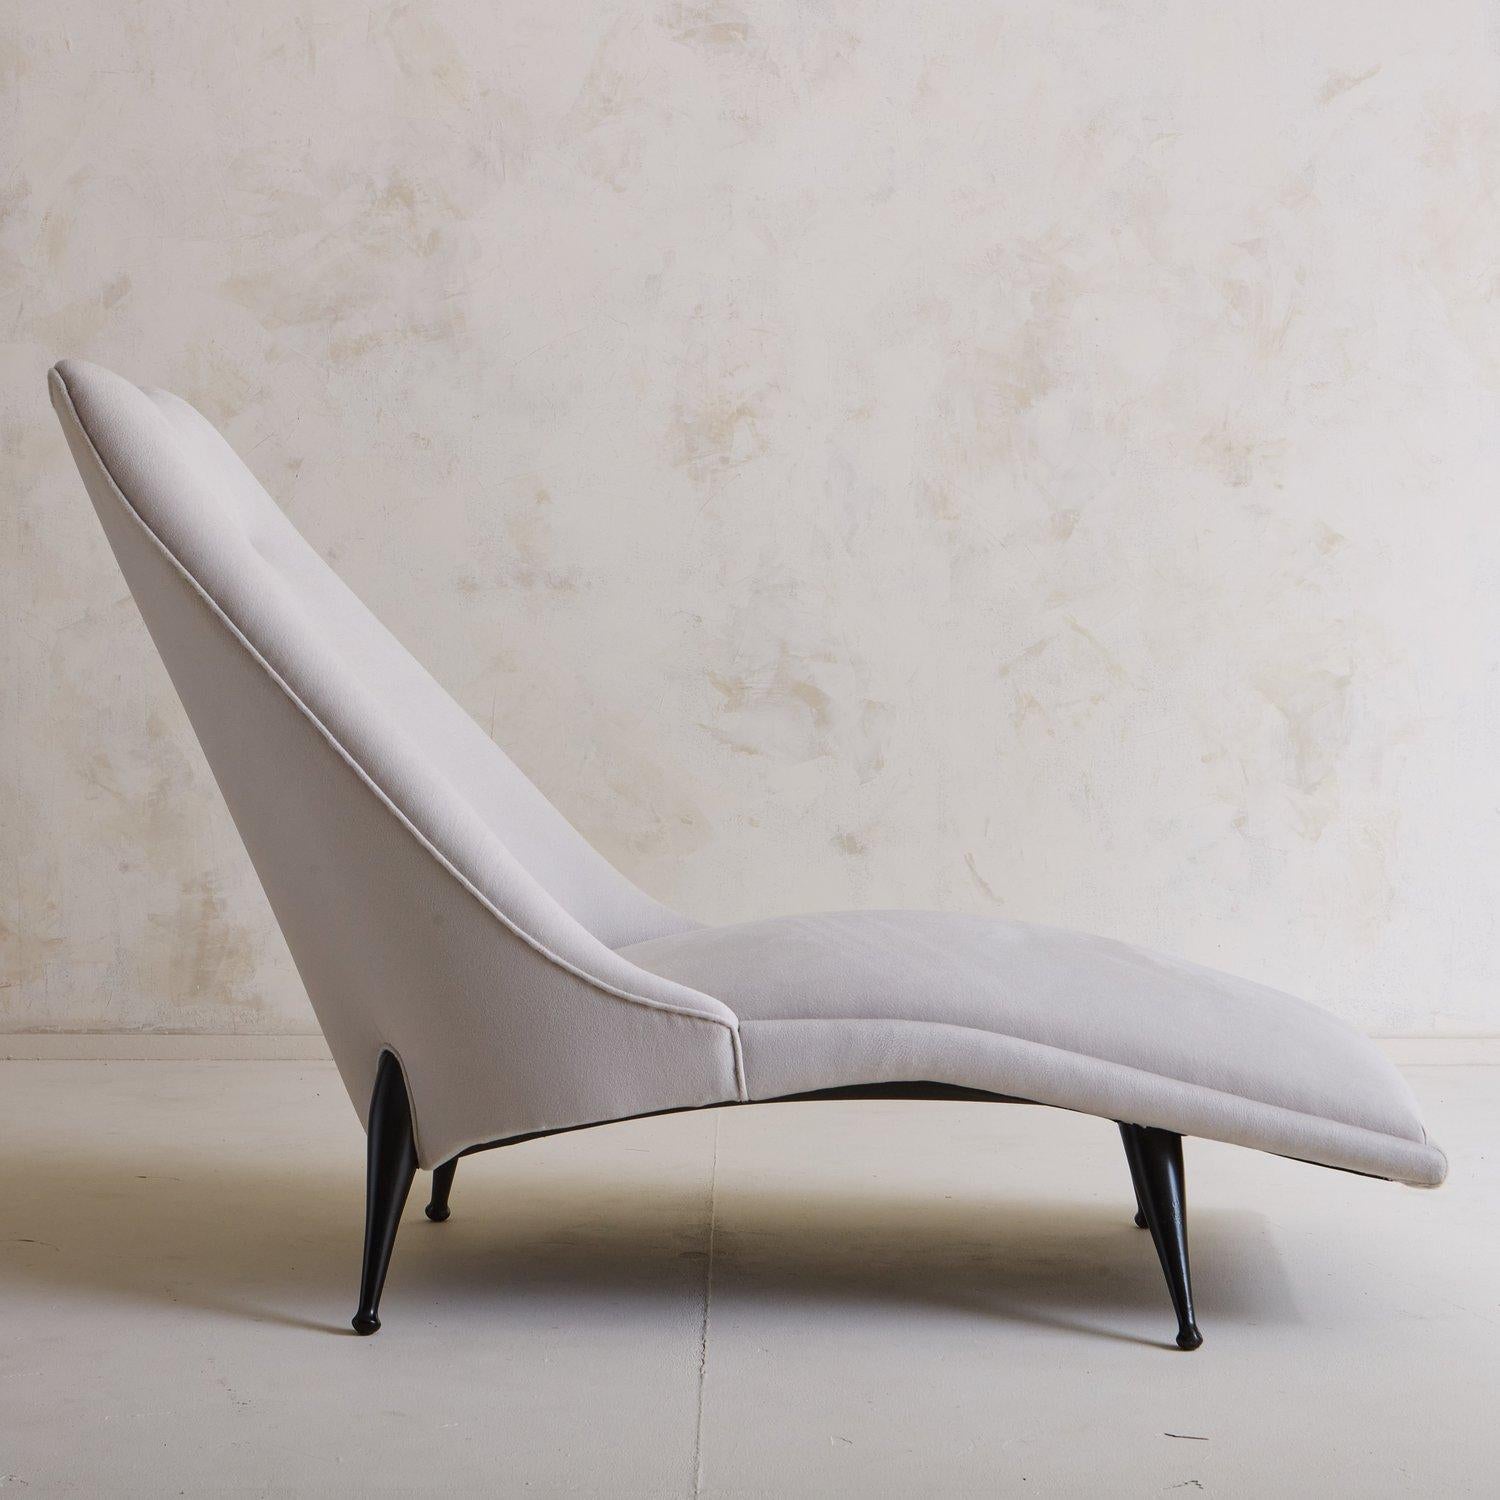 American ‘Beautiful Dreamer’ Chaise Lounge by Ben Seibel, USA 1950s For Sale